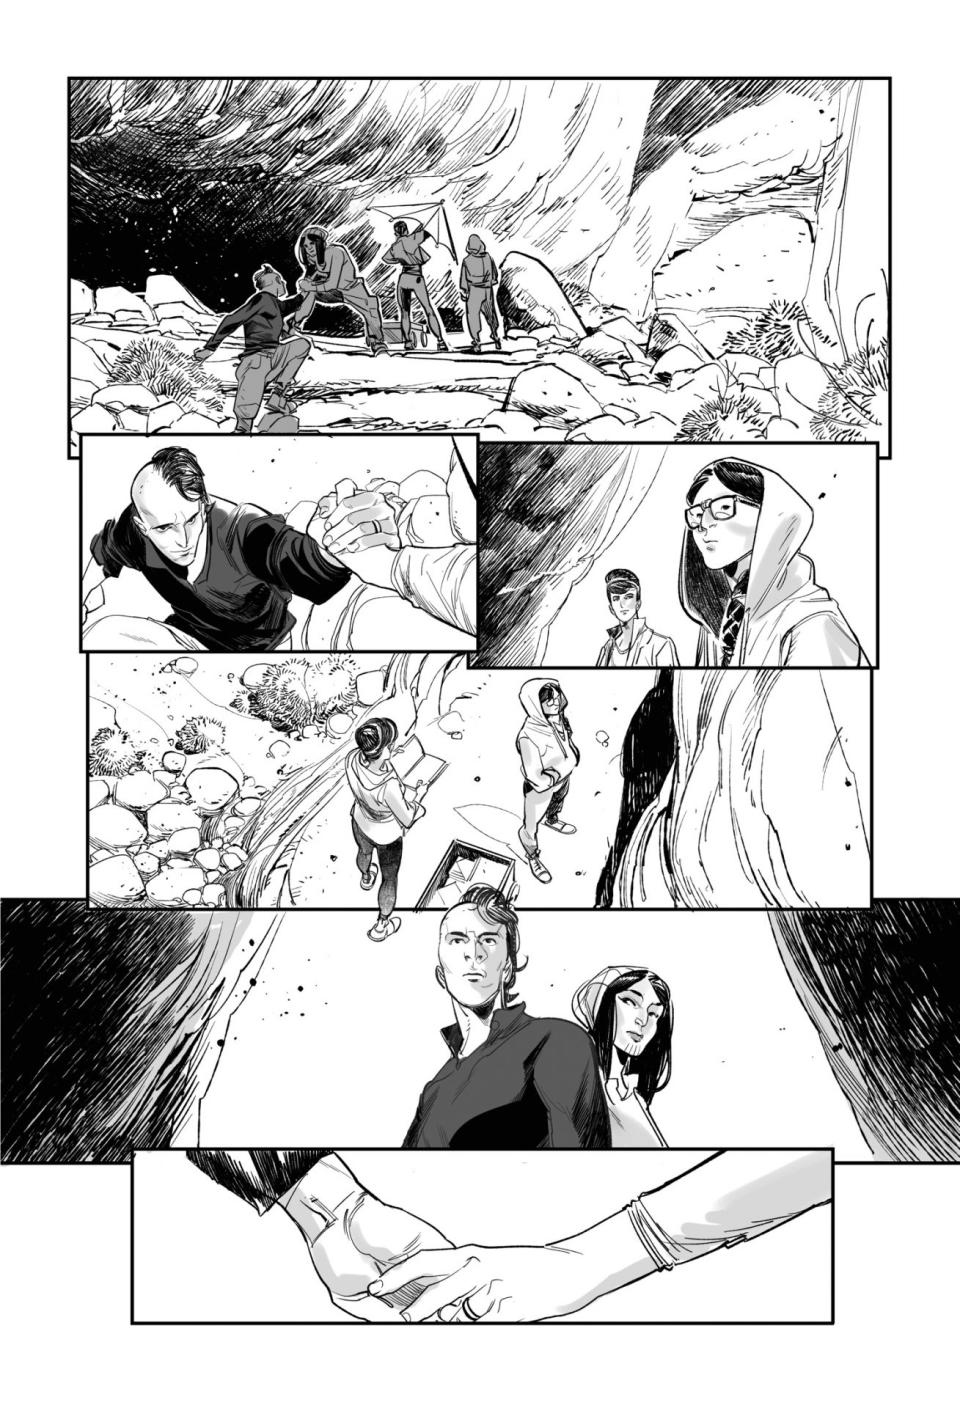 A page from Earthdivers #1 shows the young native heroes in a cave